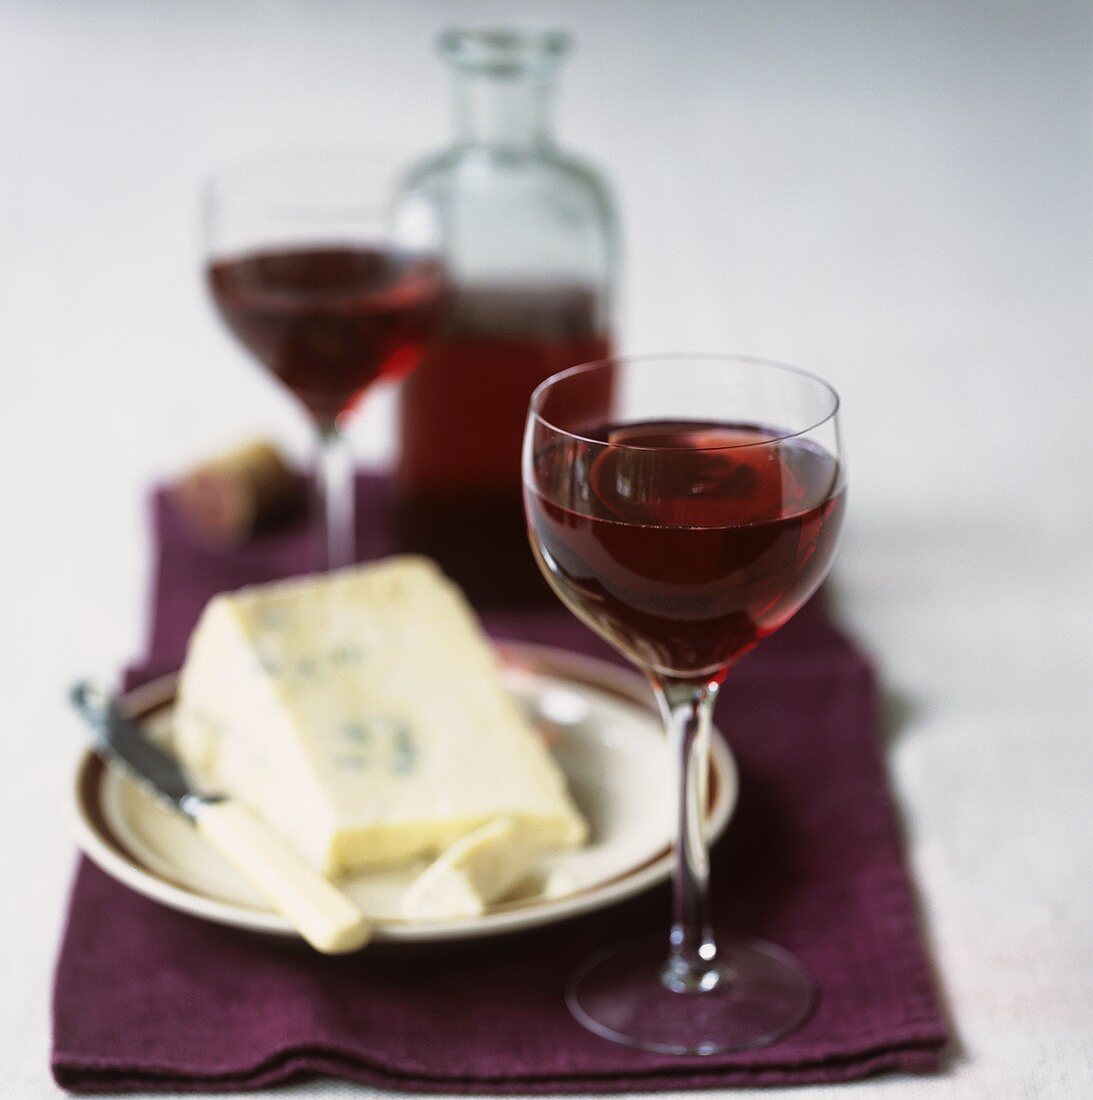 Blue cheese with red wine